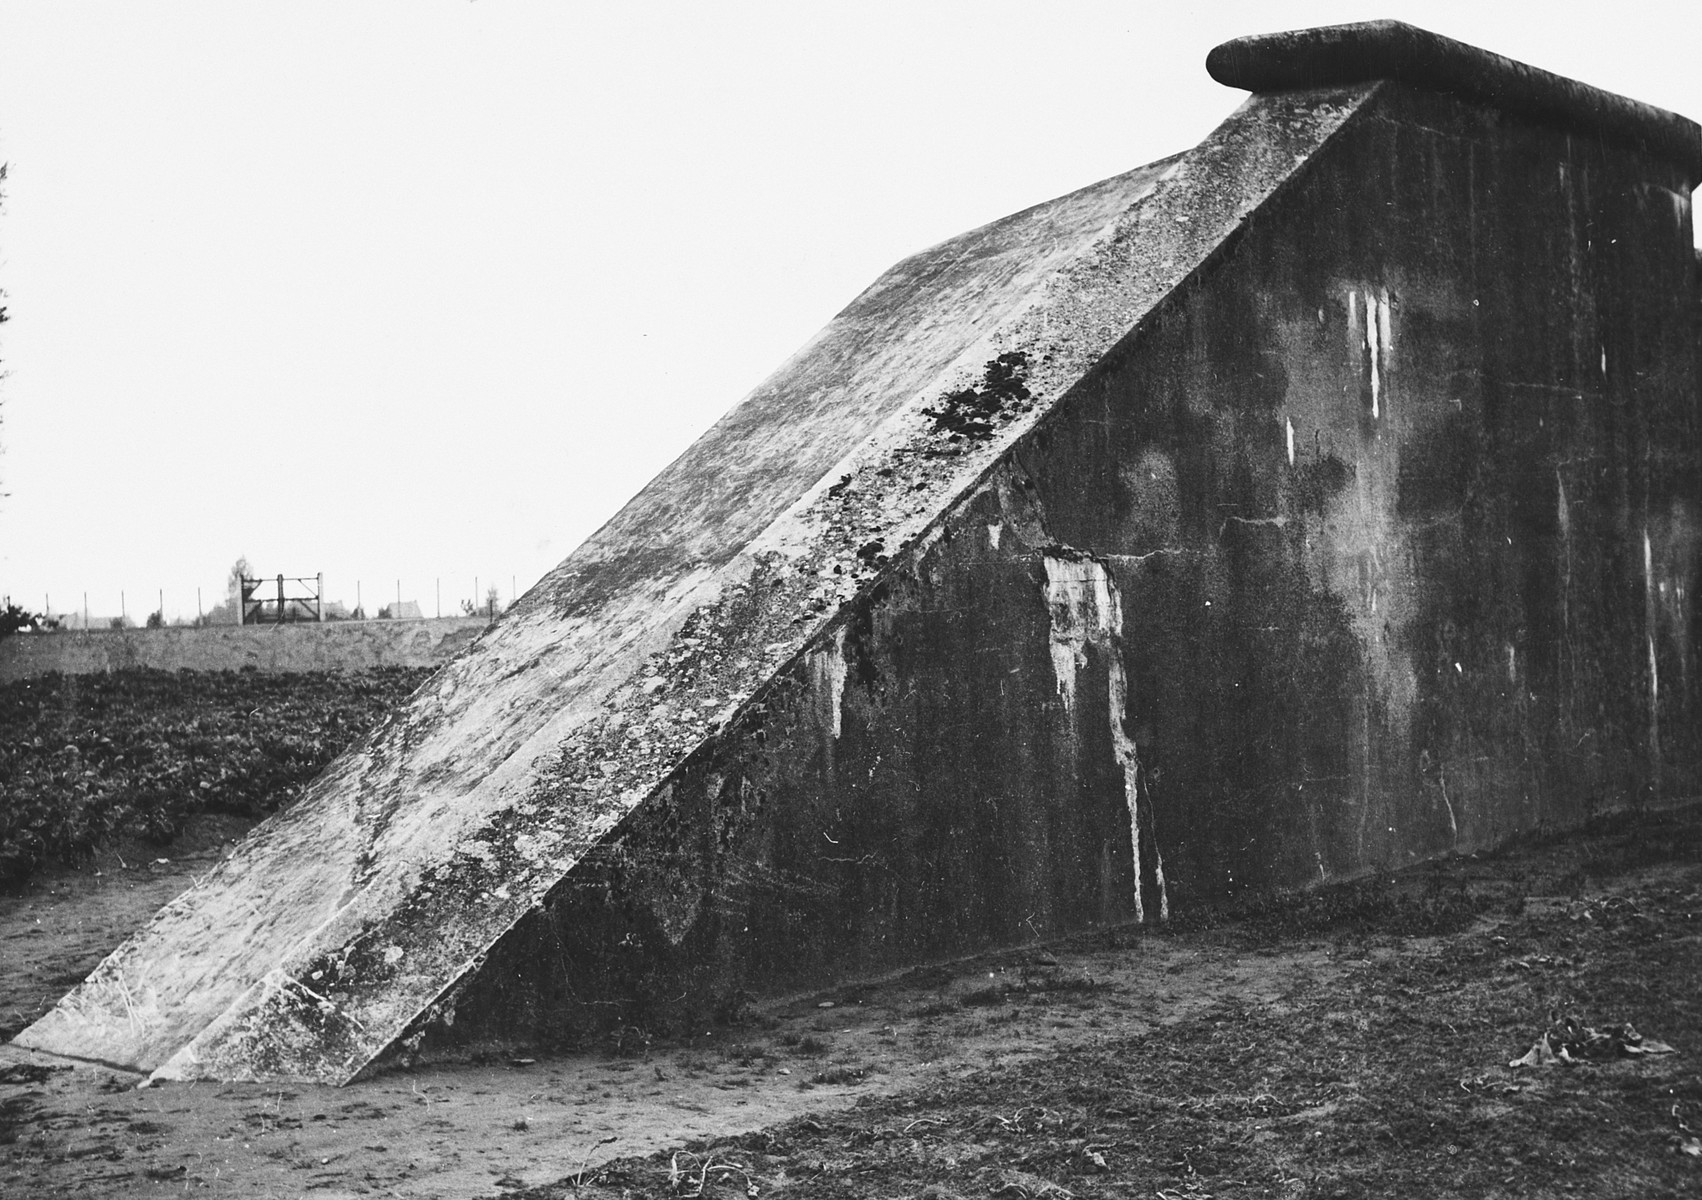 View of a steep ramp in the Breendonck concentration camp.  Prisoners were forced to crawl up and down this ramp with back packs filled with stones.